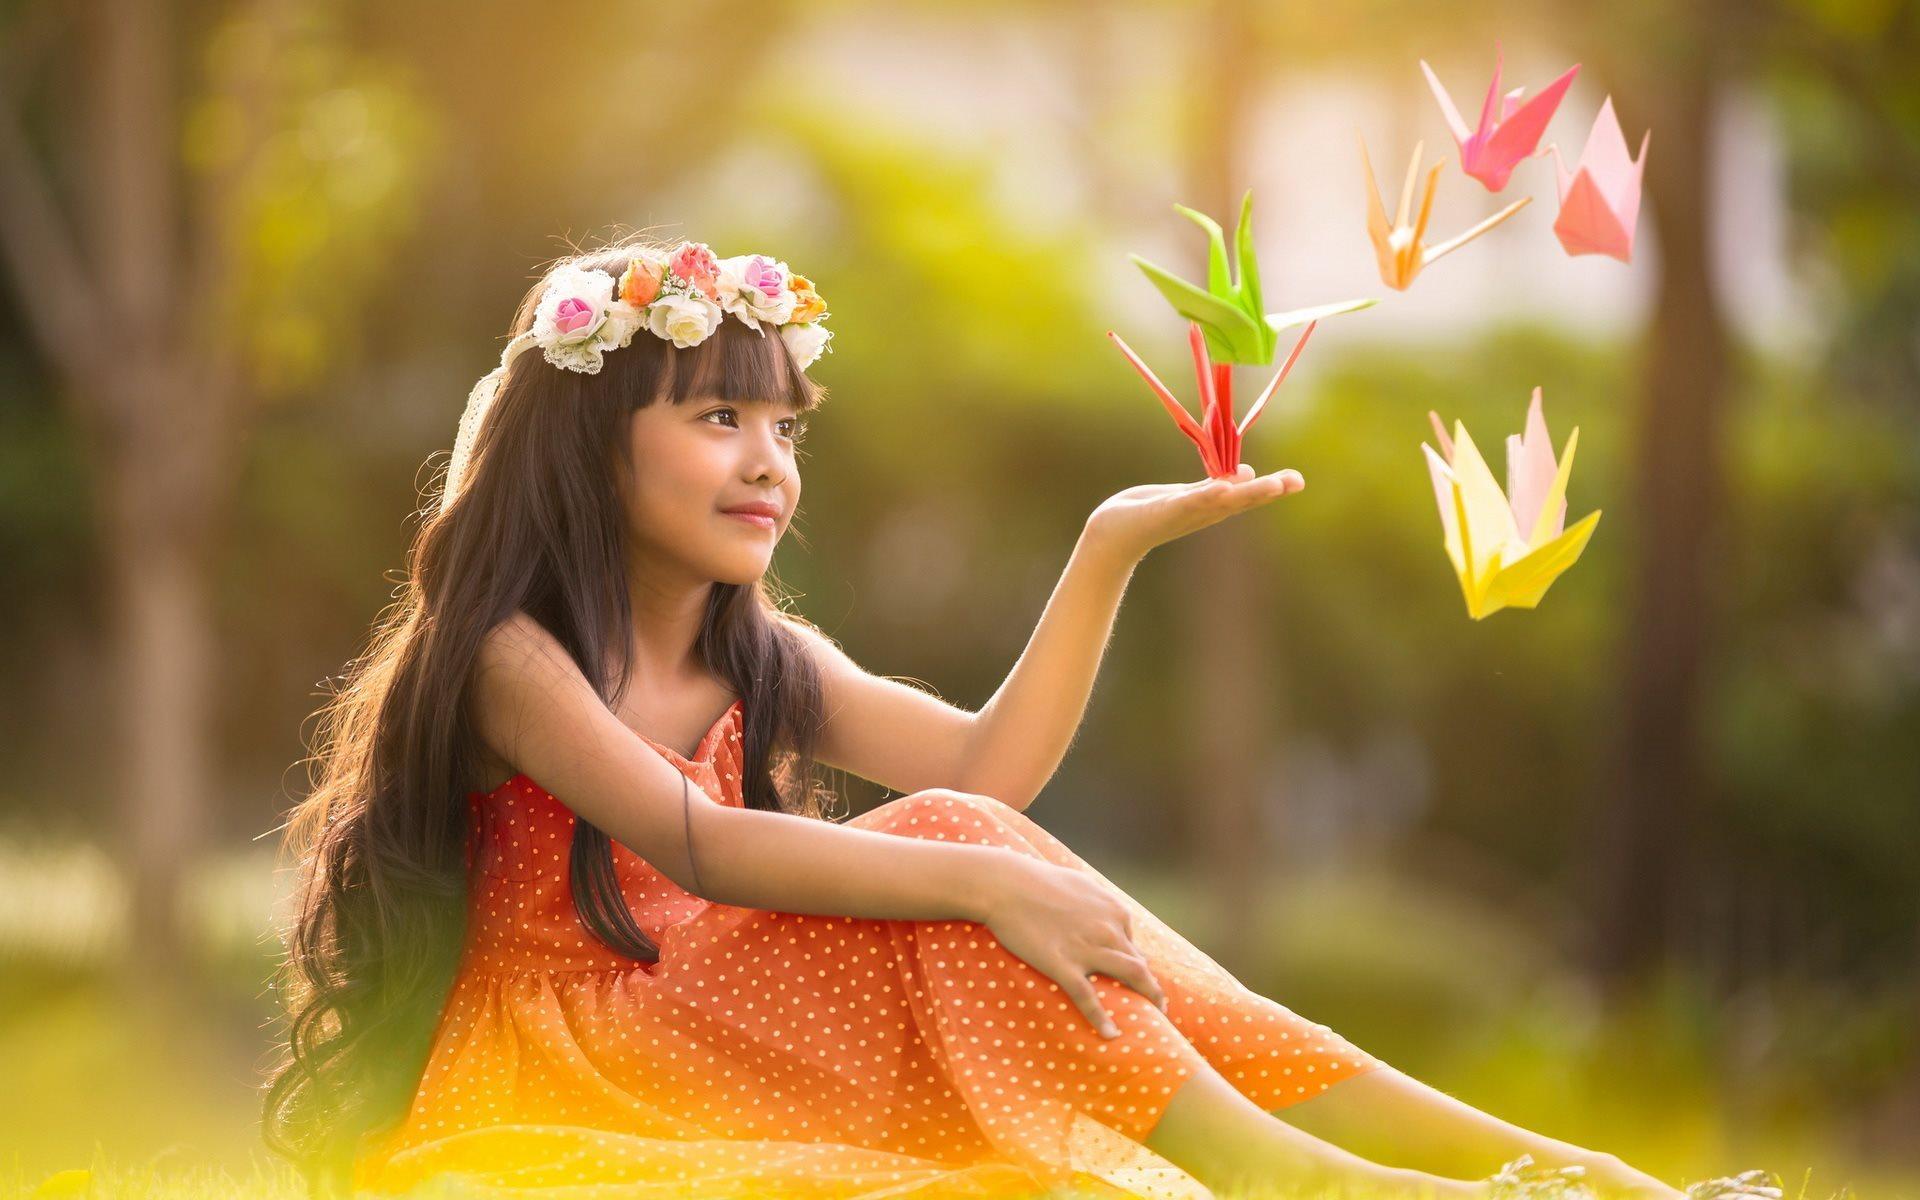 Download wallpaper nature, wreath, summer, flowers, child, girl, crane, children, origami for desktop with resolution 1920x1200. High Quality HD picture wallpaper